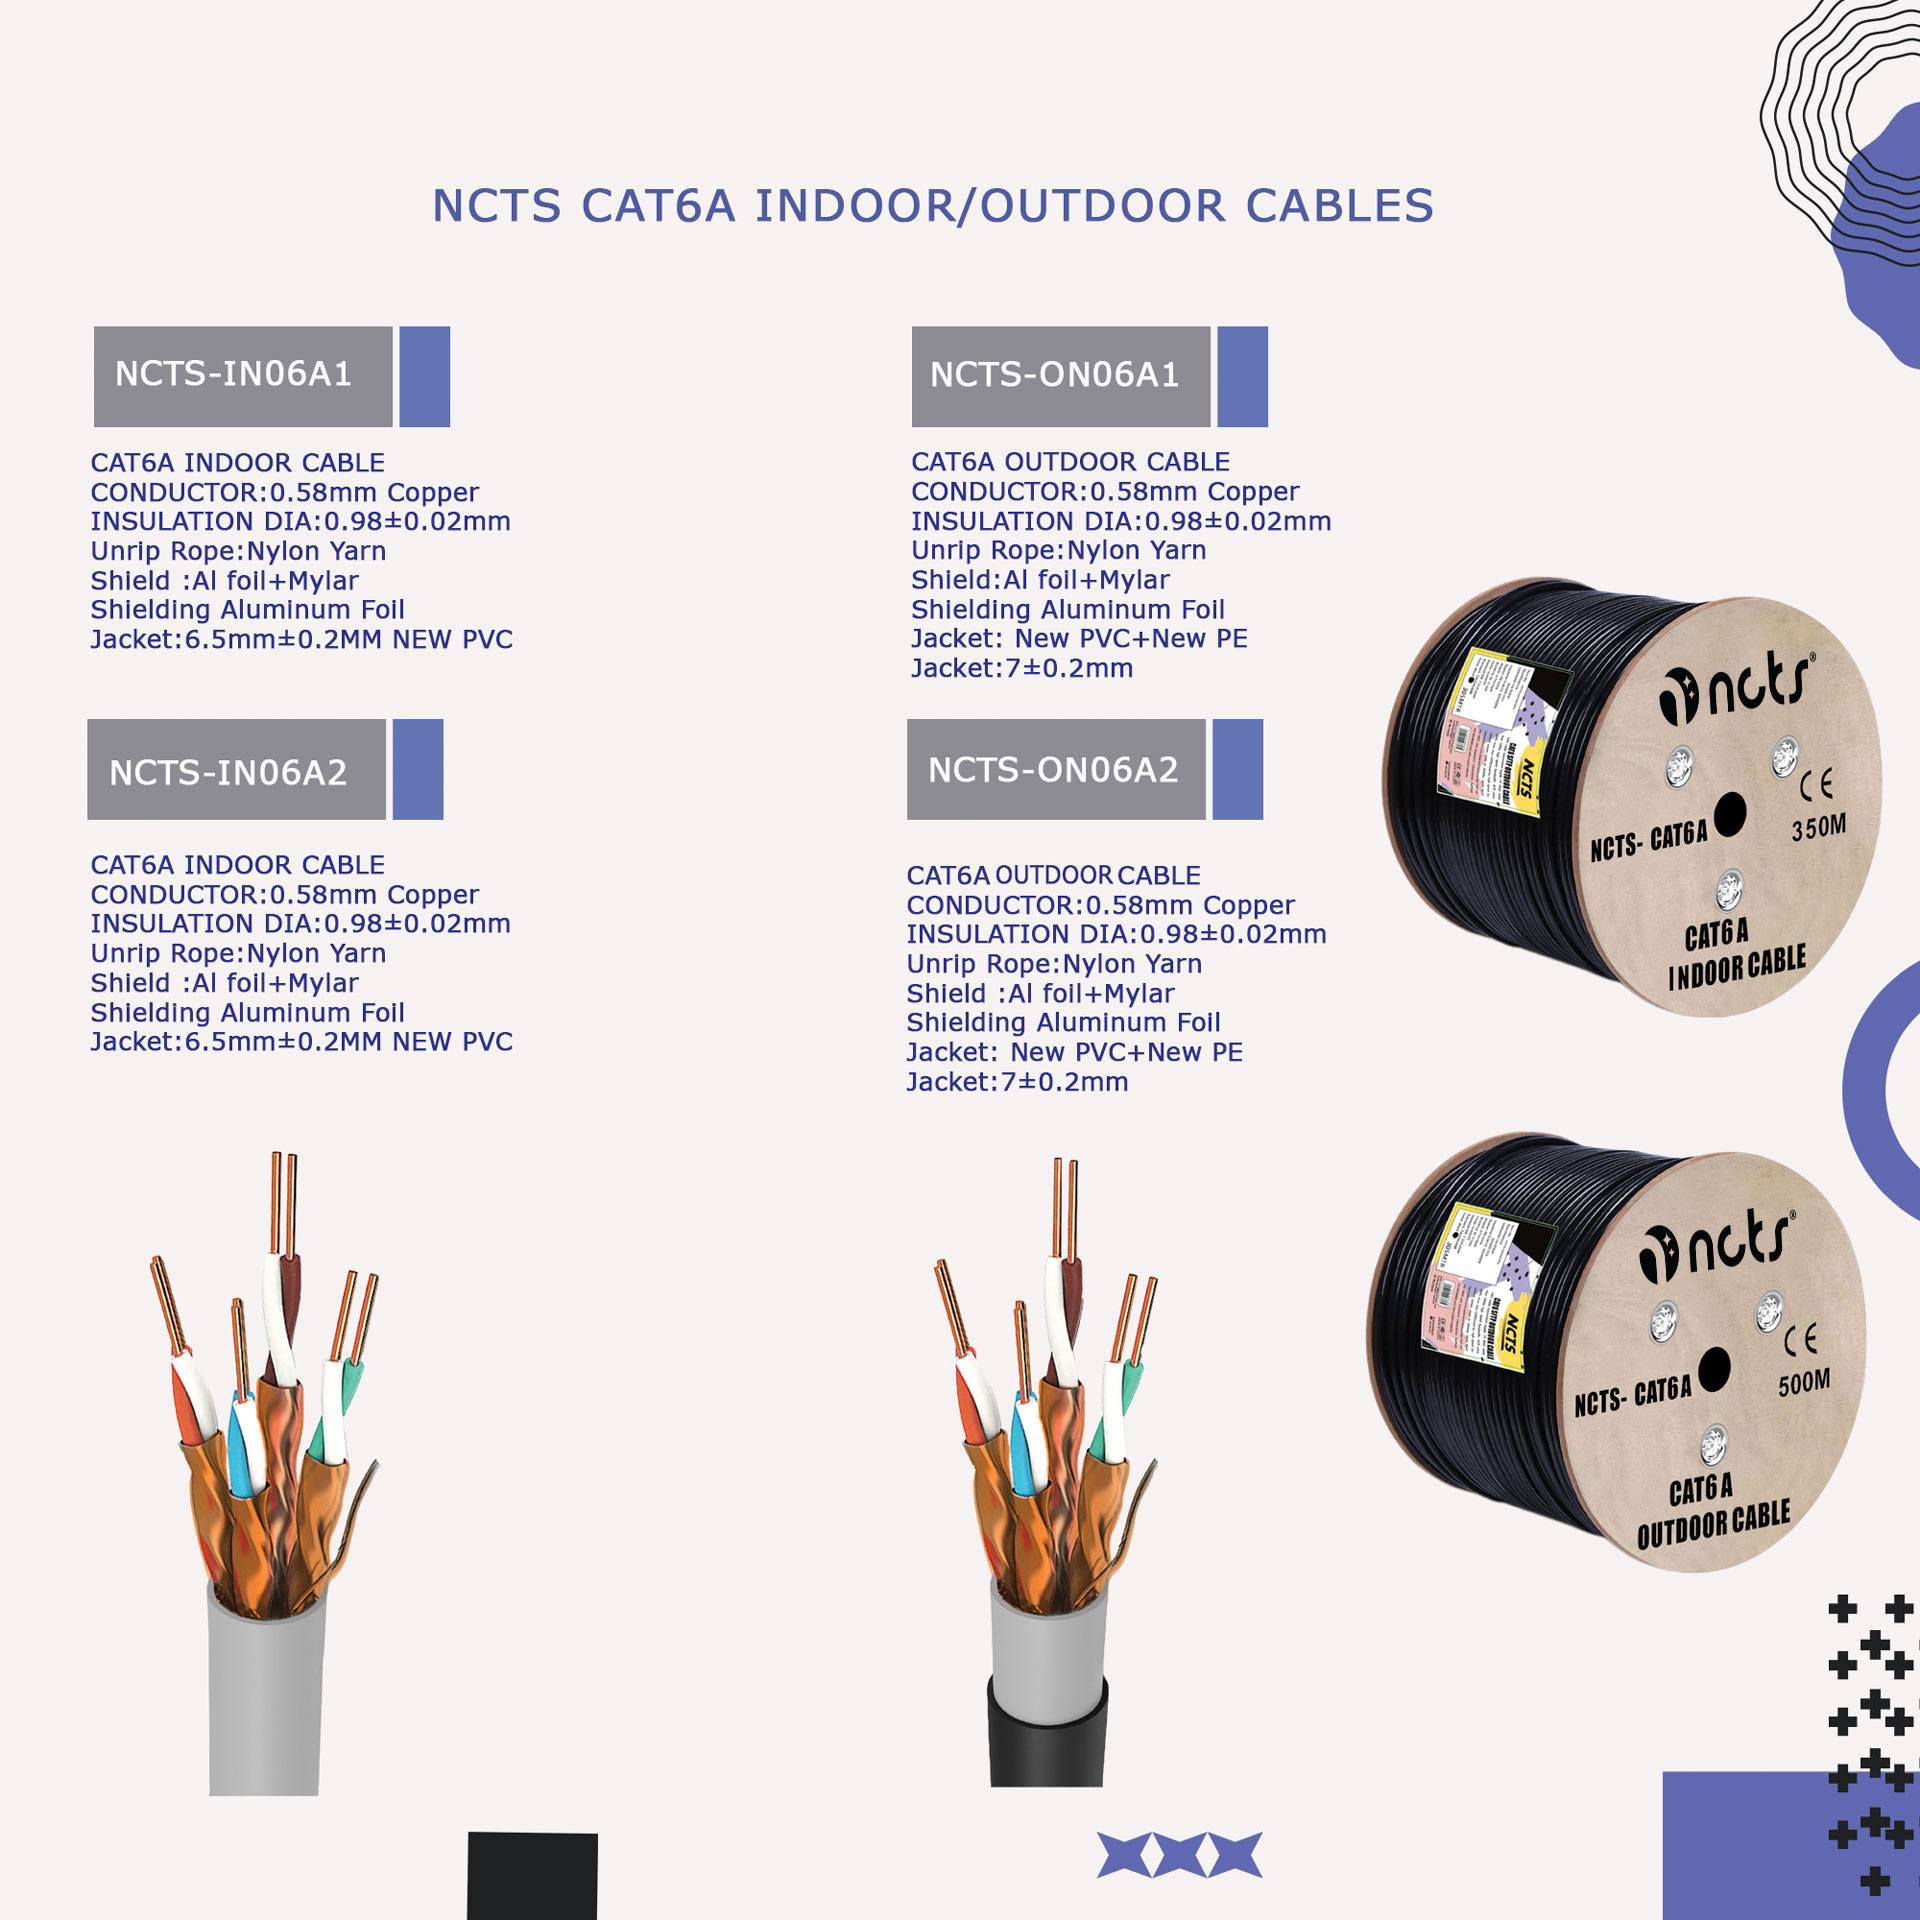 NCTS CAT6A CABLES